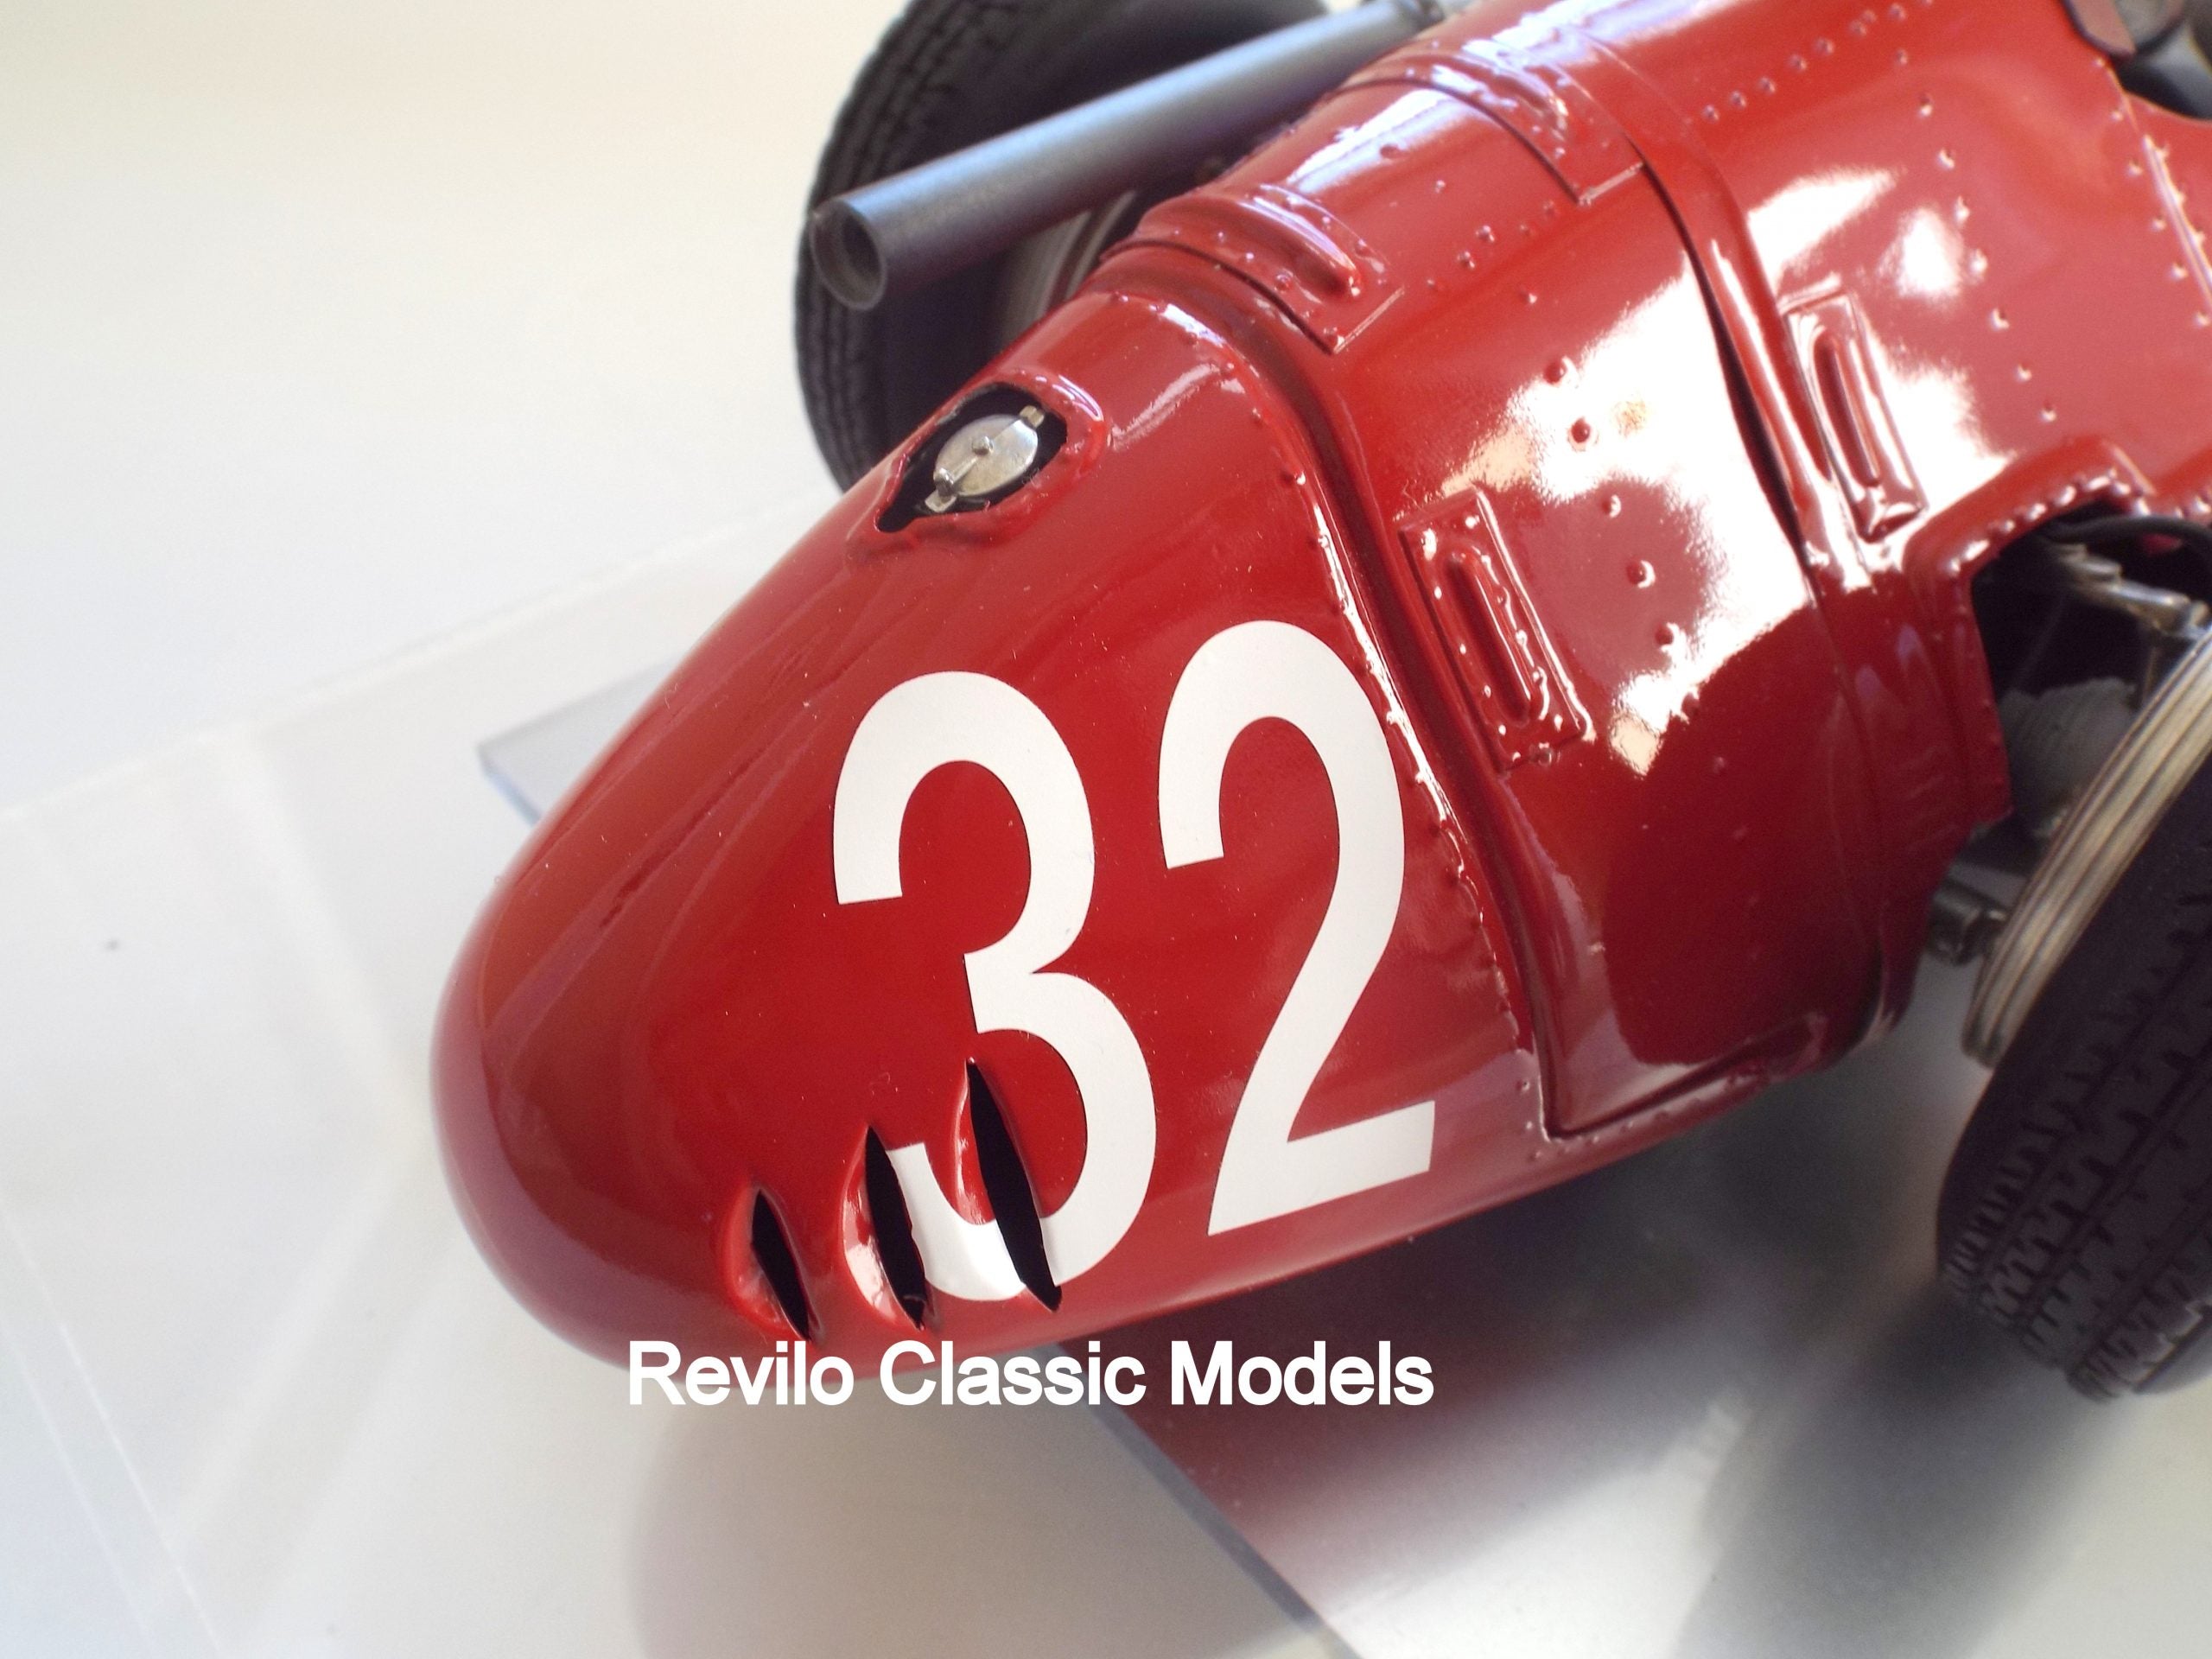 Maserati 250F 1:8 Scale by Javan Smith